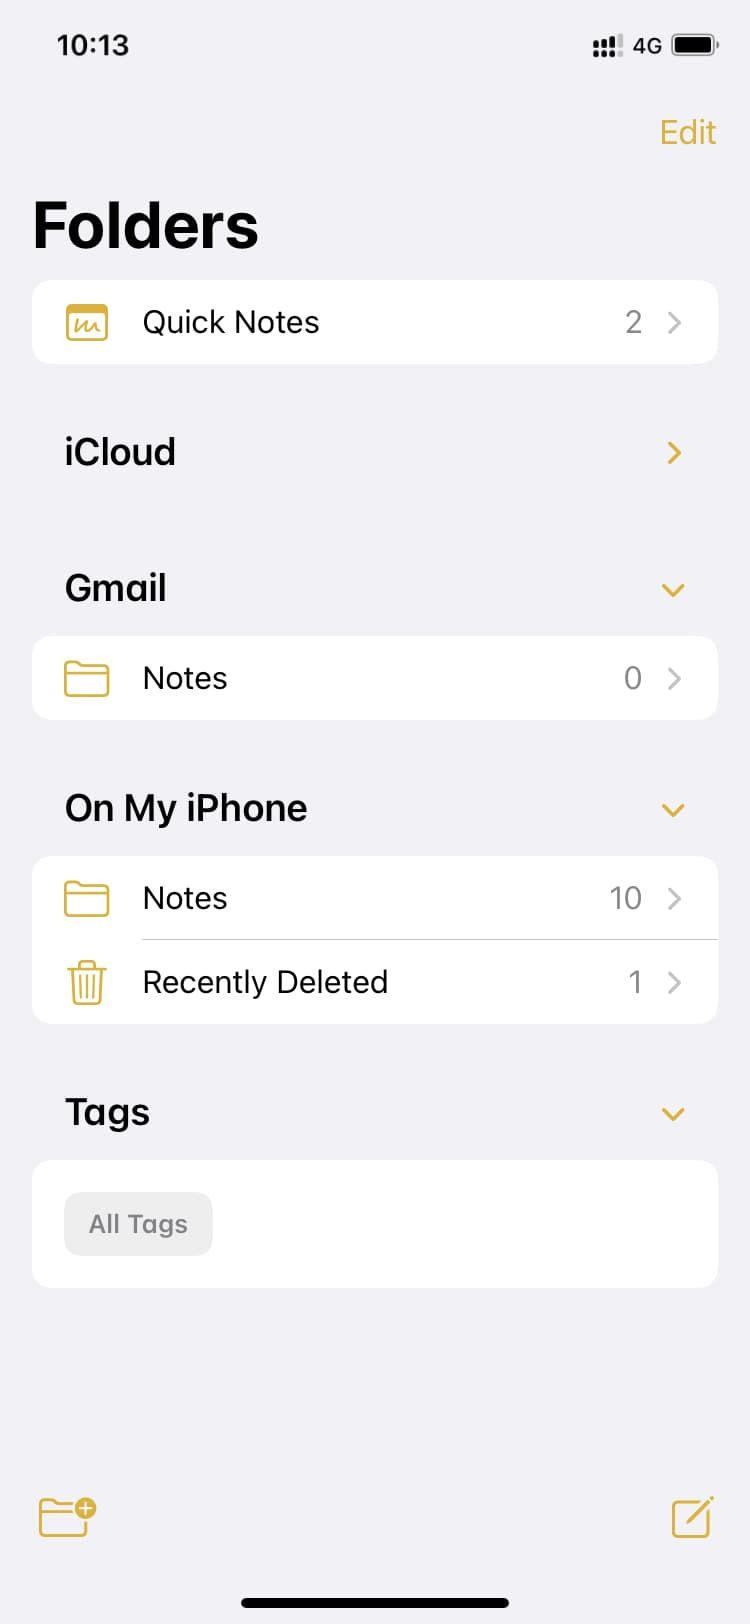 Create notes in Gmail inside the iOS Notes app